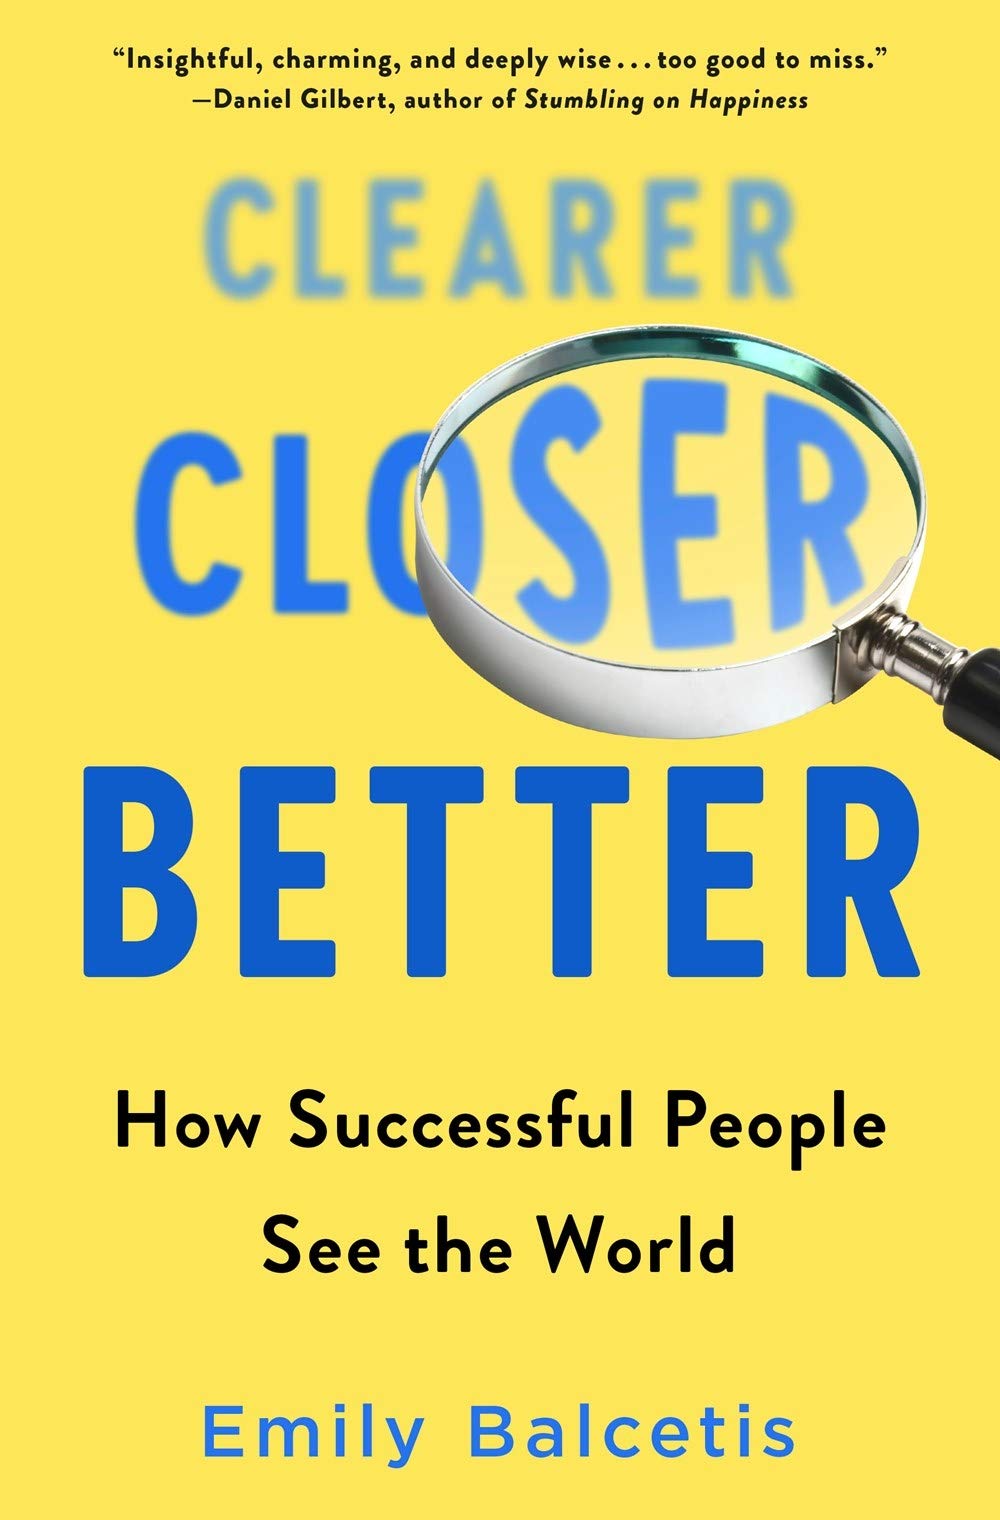 Book cover of Clearer Closer Better by Emily Balcetis